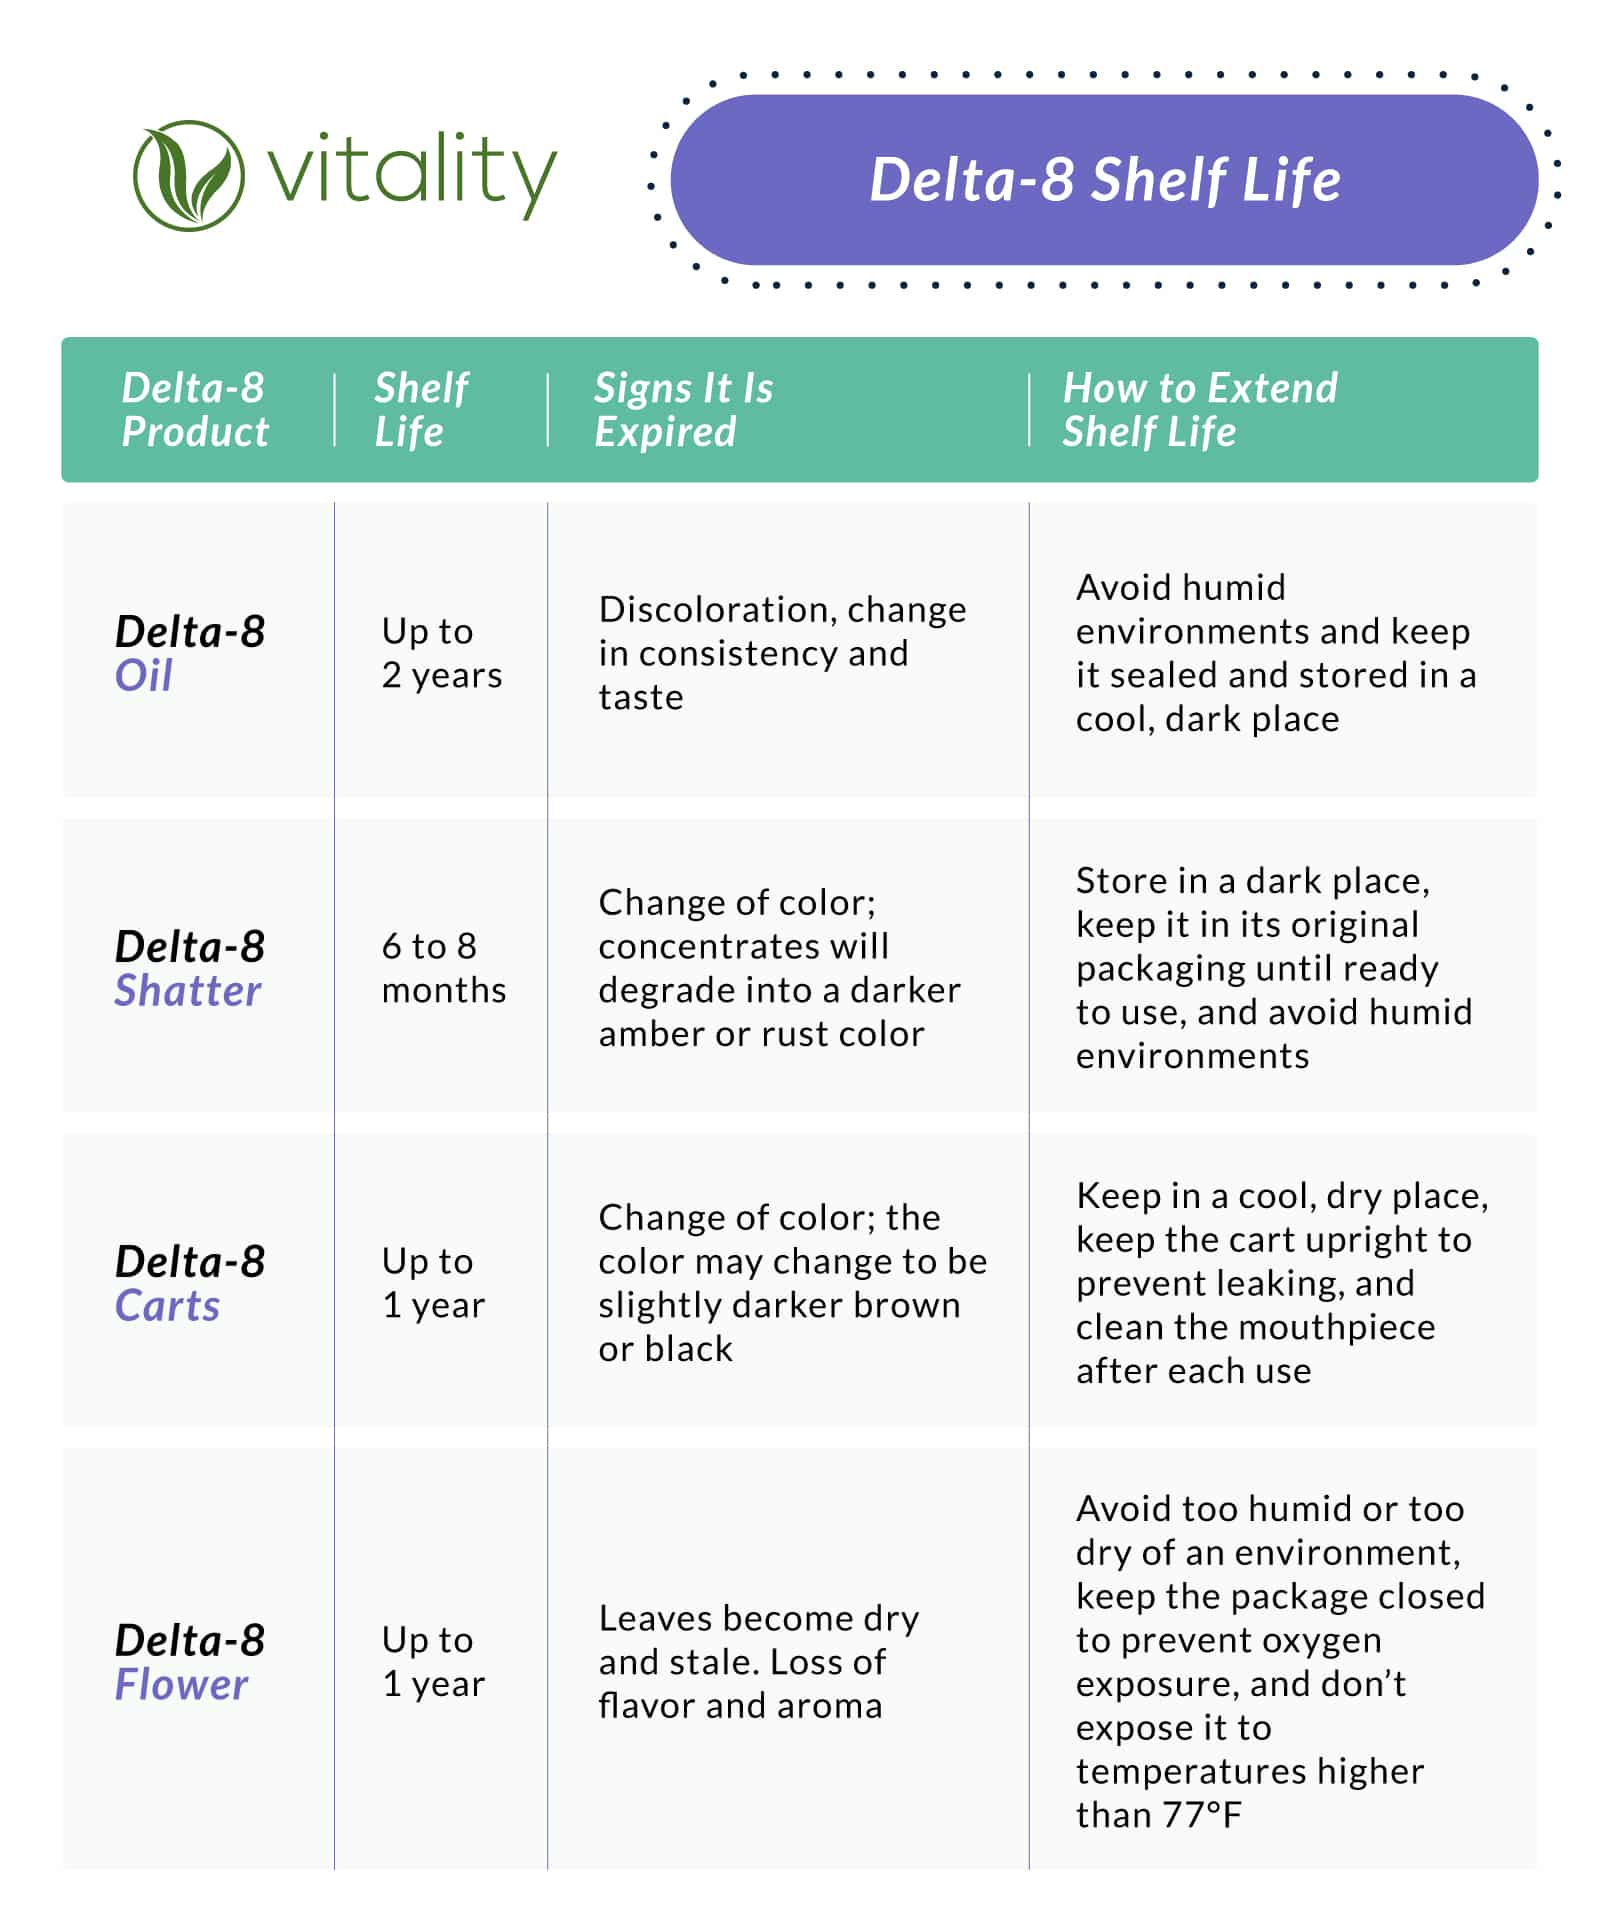 Chart summarizing the information above regarding Delta-8 products and their expiration date, signs they are expired, and how to extend their shelf life.